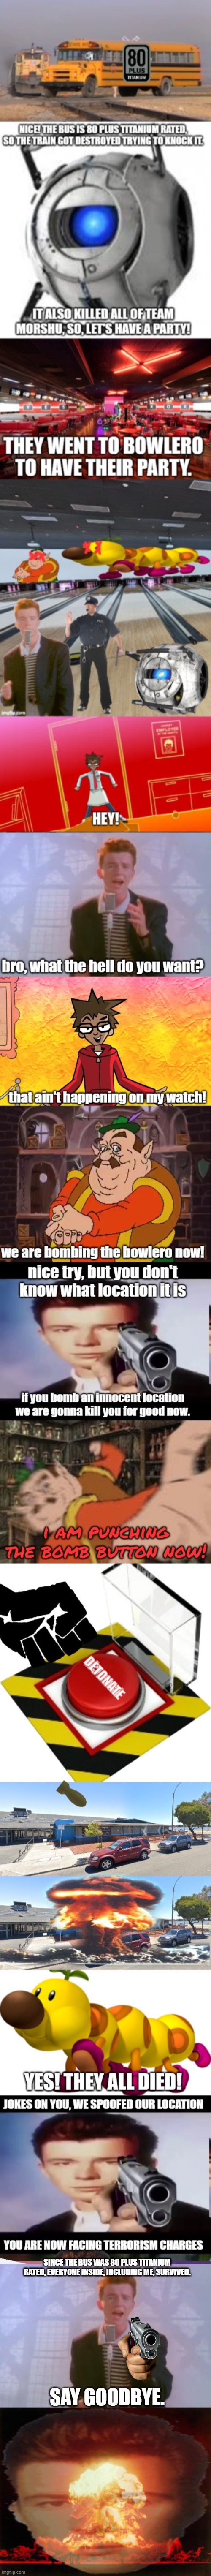 SINCE THE BUS WAS 80 PLUS TITANIUM RATED, EVERYONE INSIDE, INCLUDING ME, SURVIVED. SAY GOODBYE. | image tagged in rick astley,memes,nuclear explosion | made w/ Imgflip meme maker